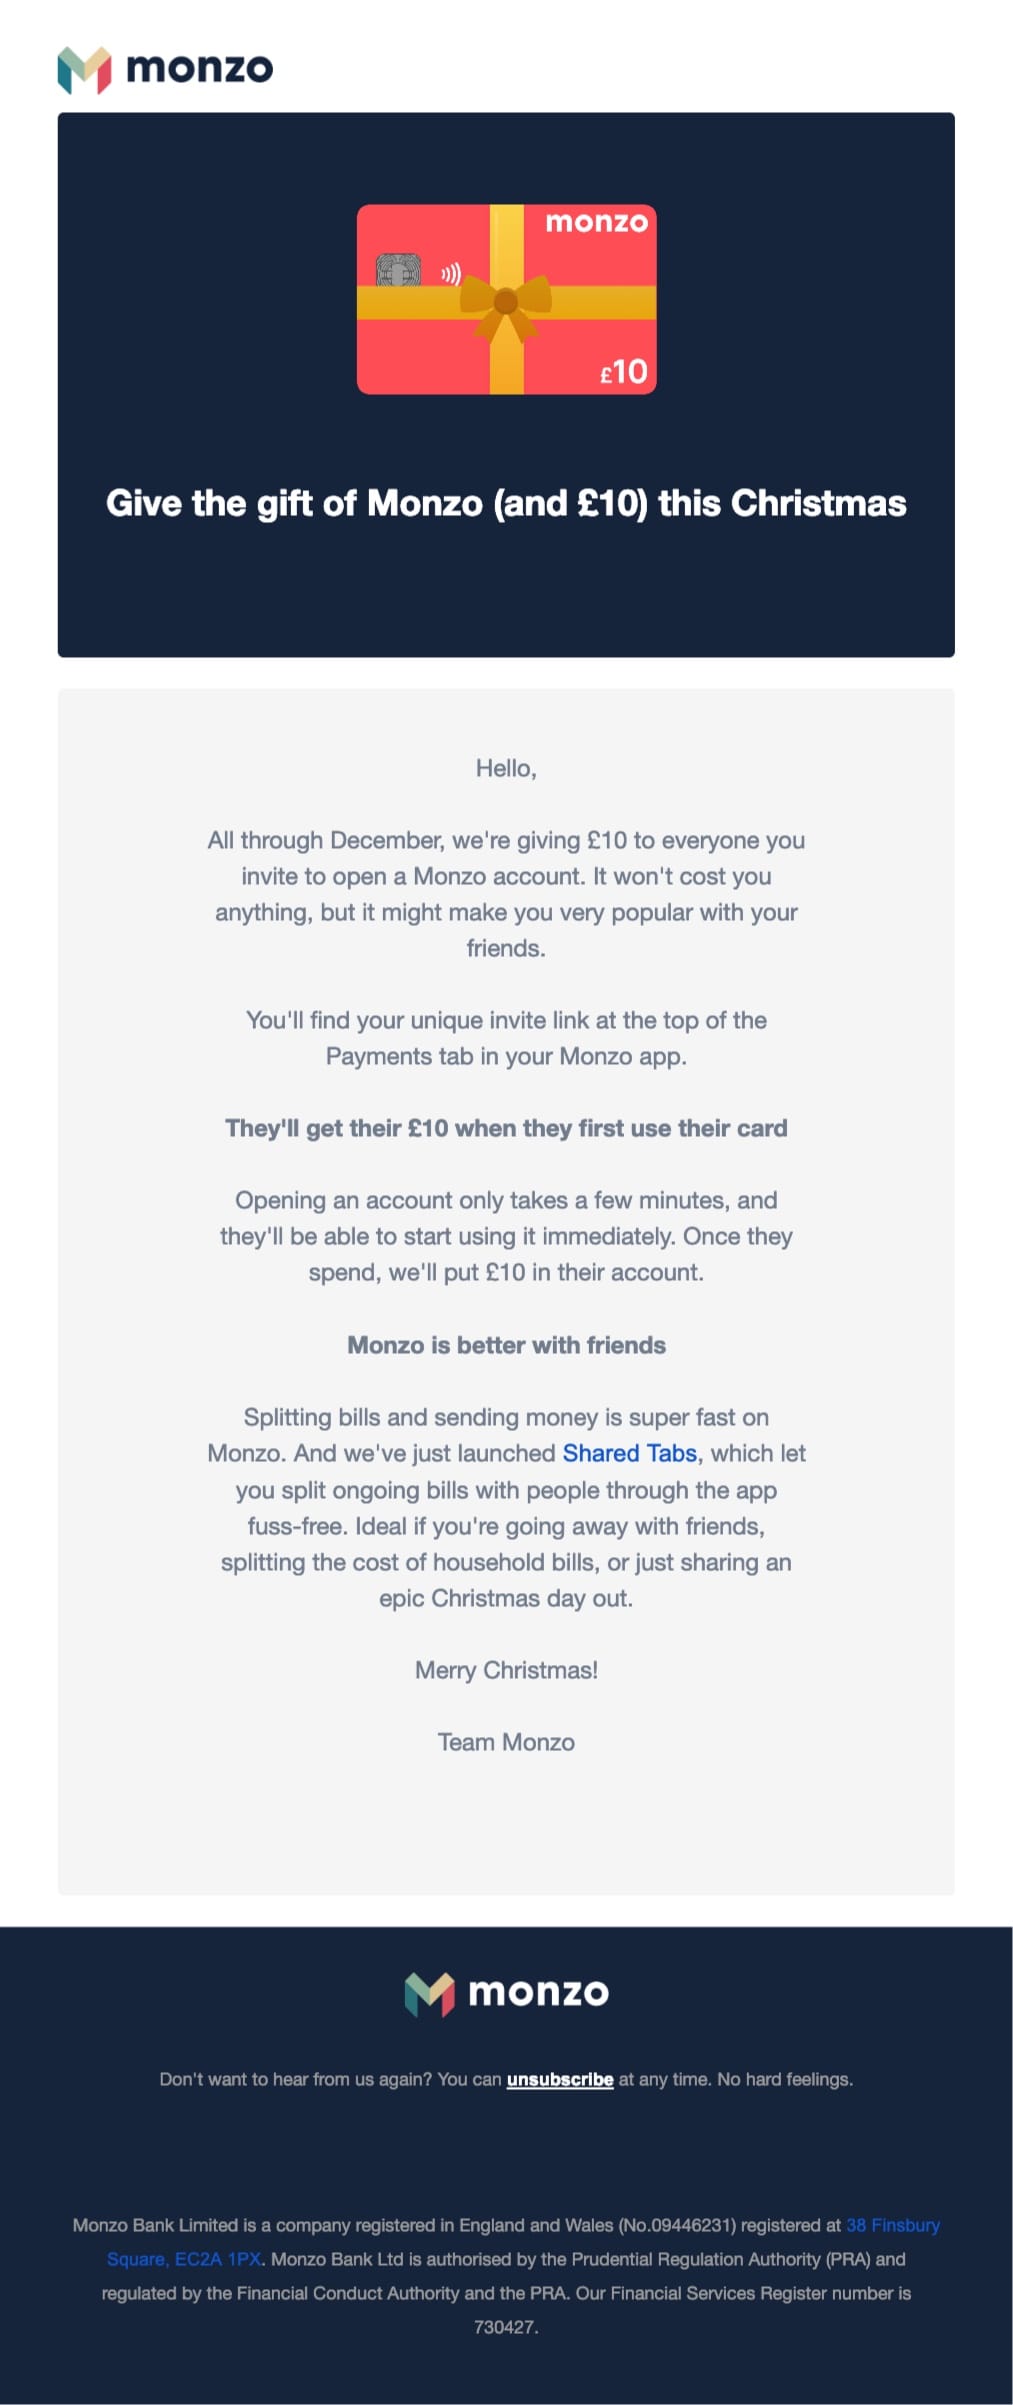 email example monzo (holiday offer)